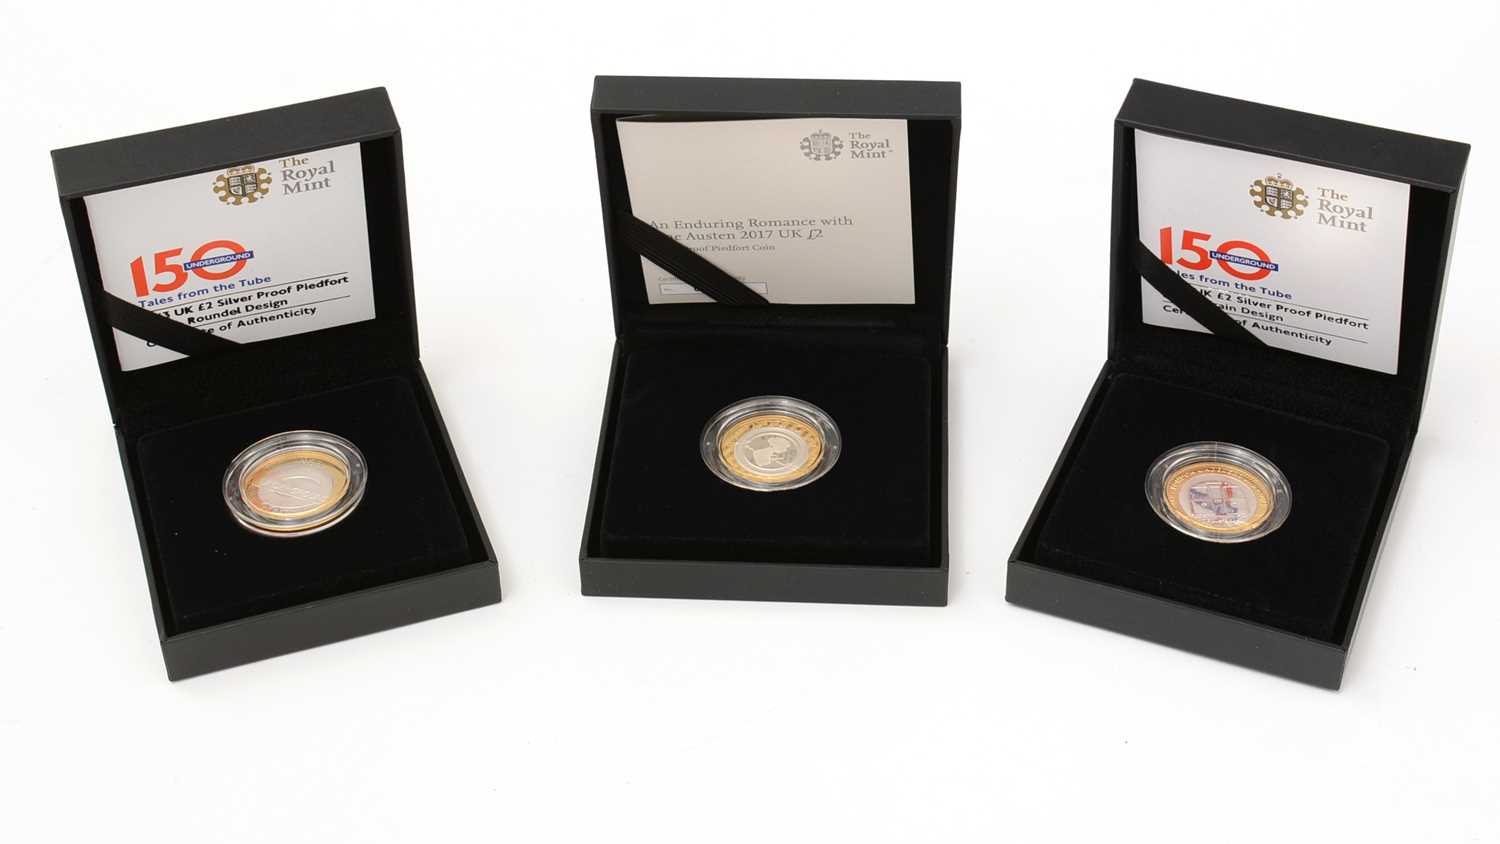 The Royal Mint United Kingdom £2 Silver Proof Piedfort coins